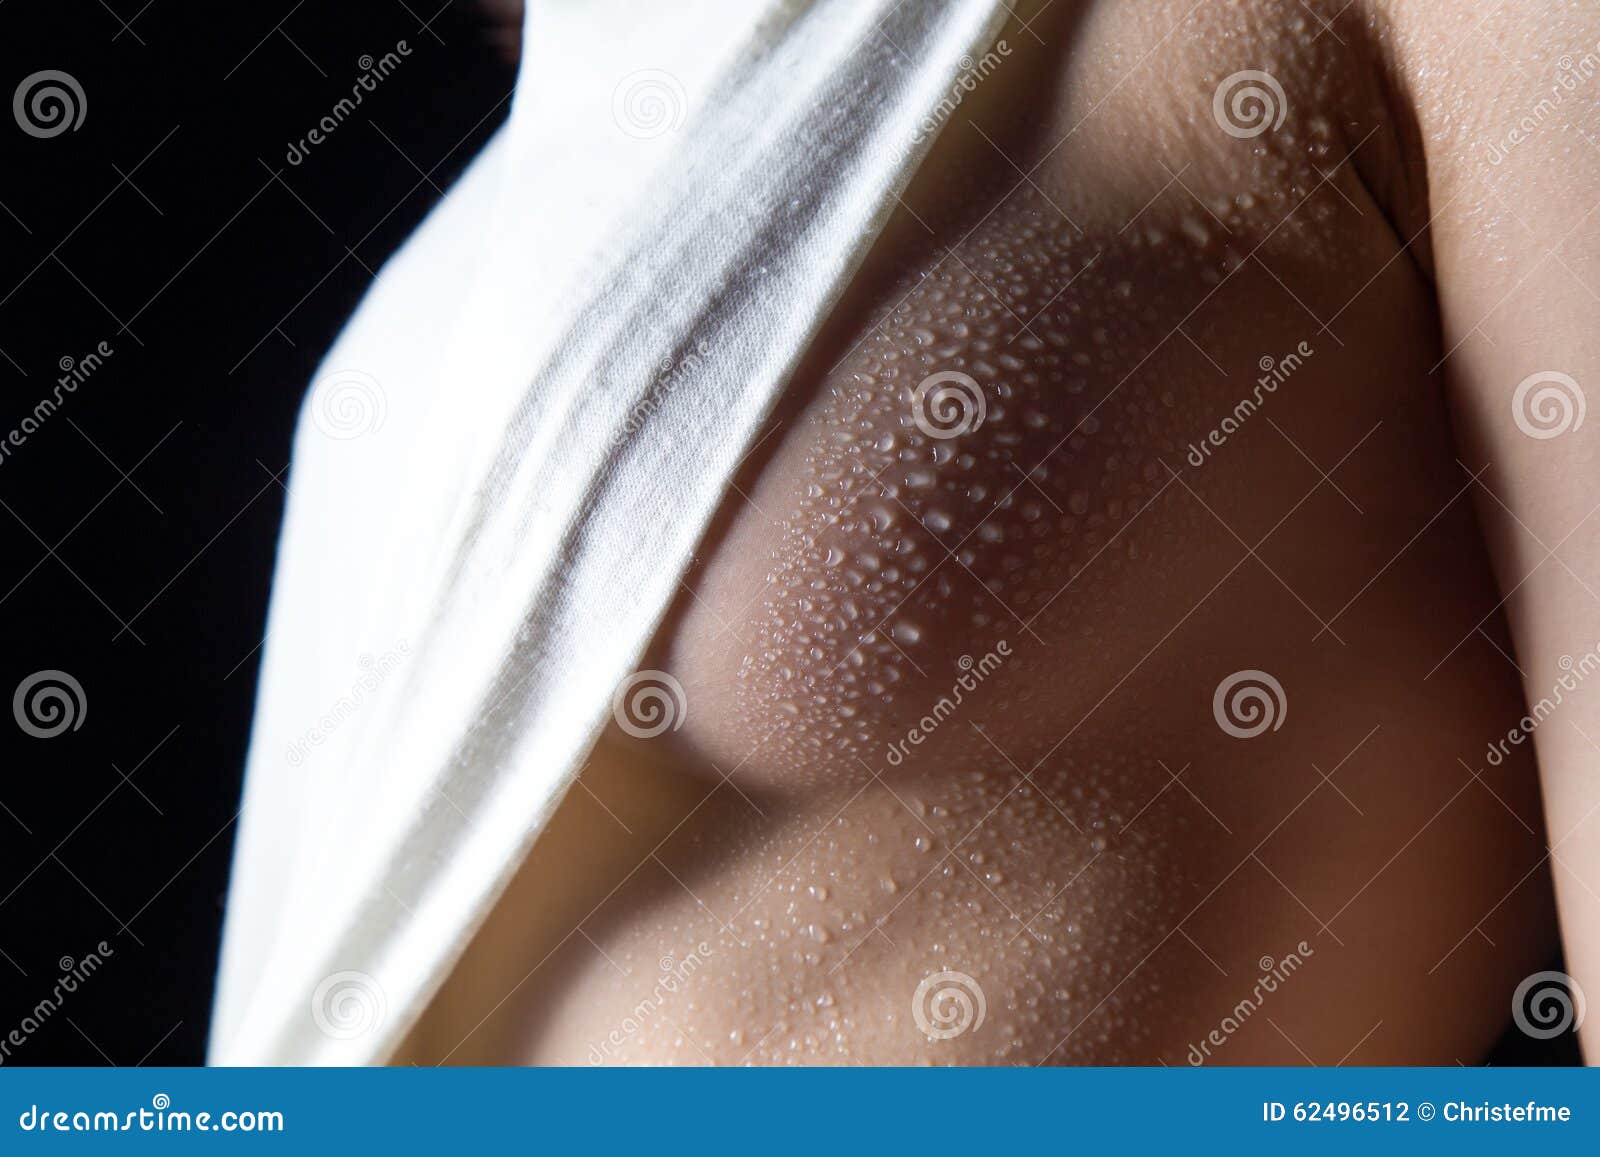 Woman S Breast with Drops in Shadow Stock Photo - Image of profile